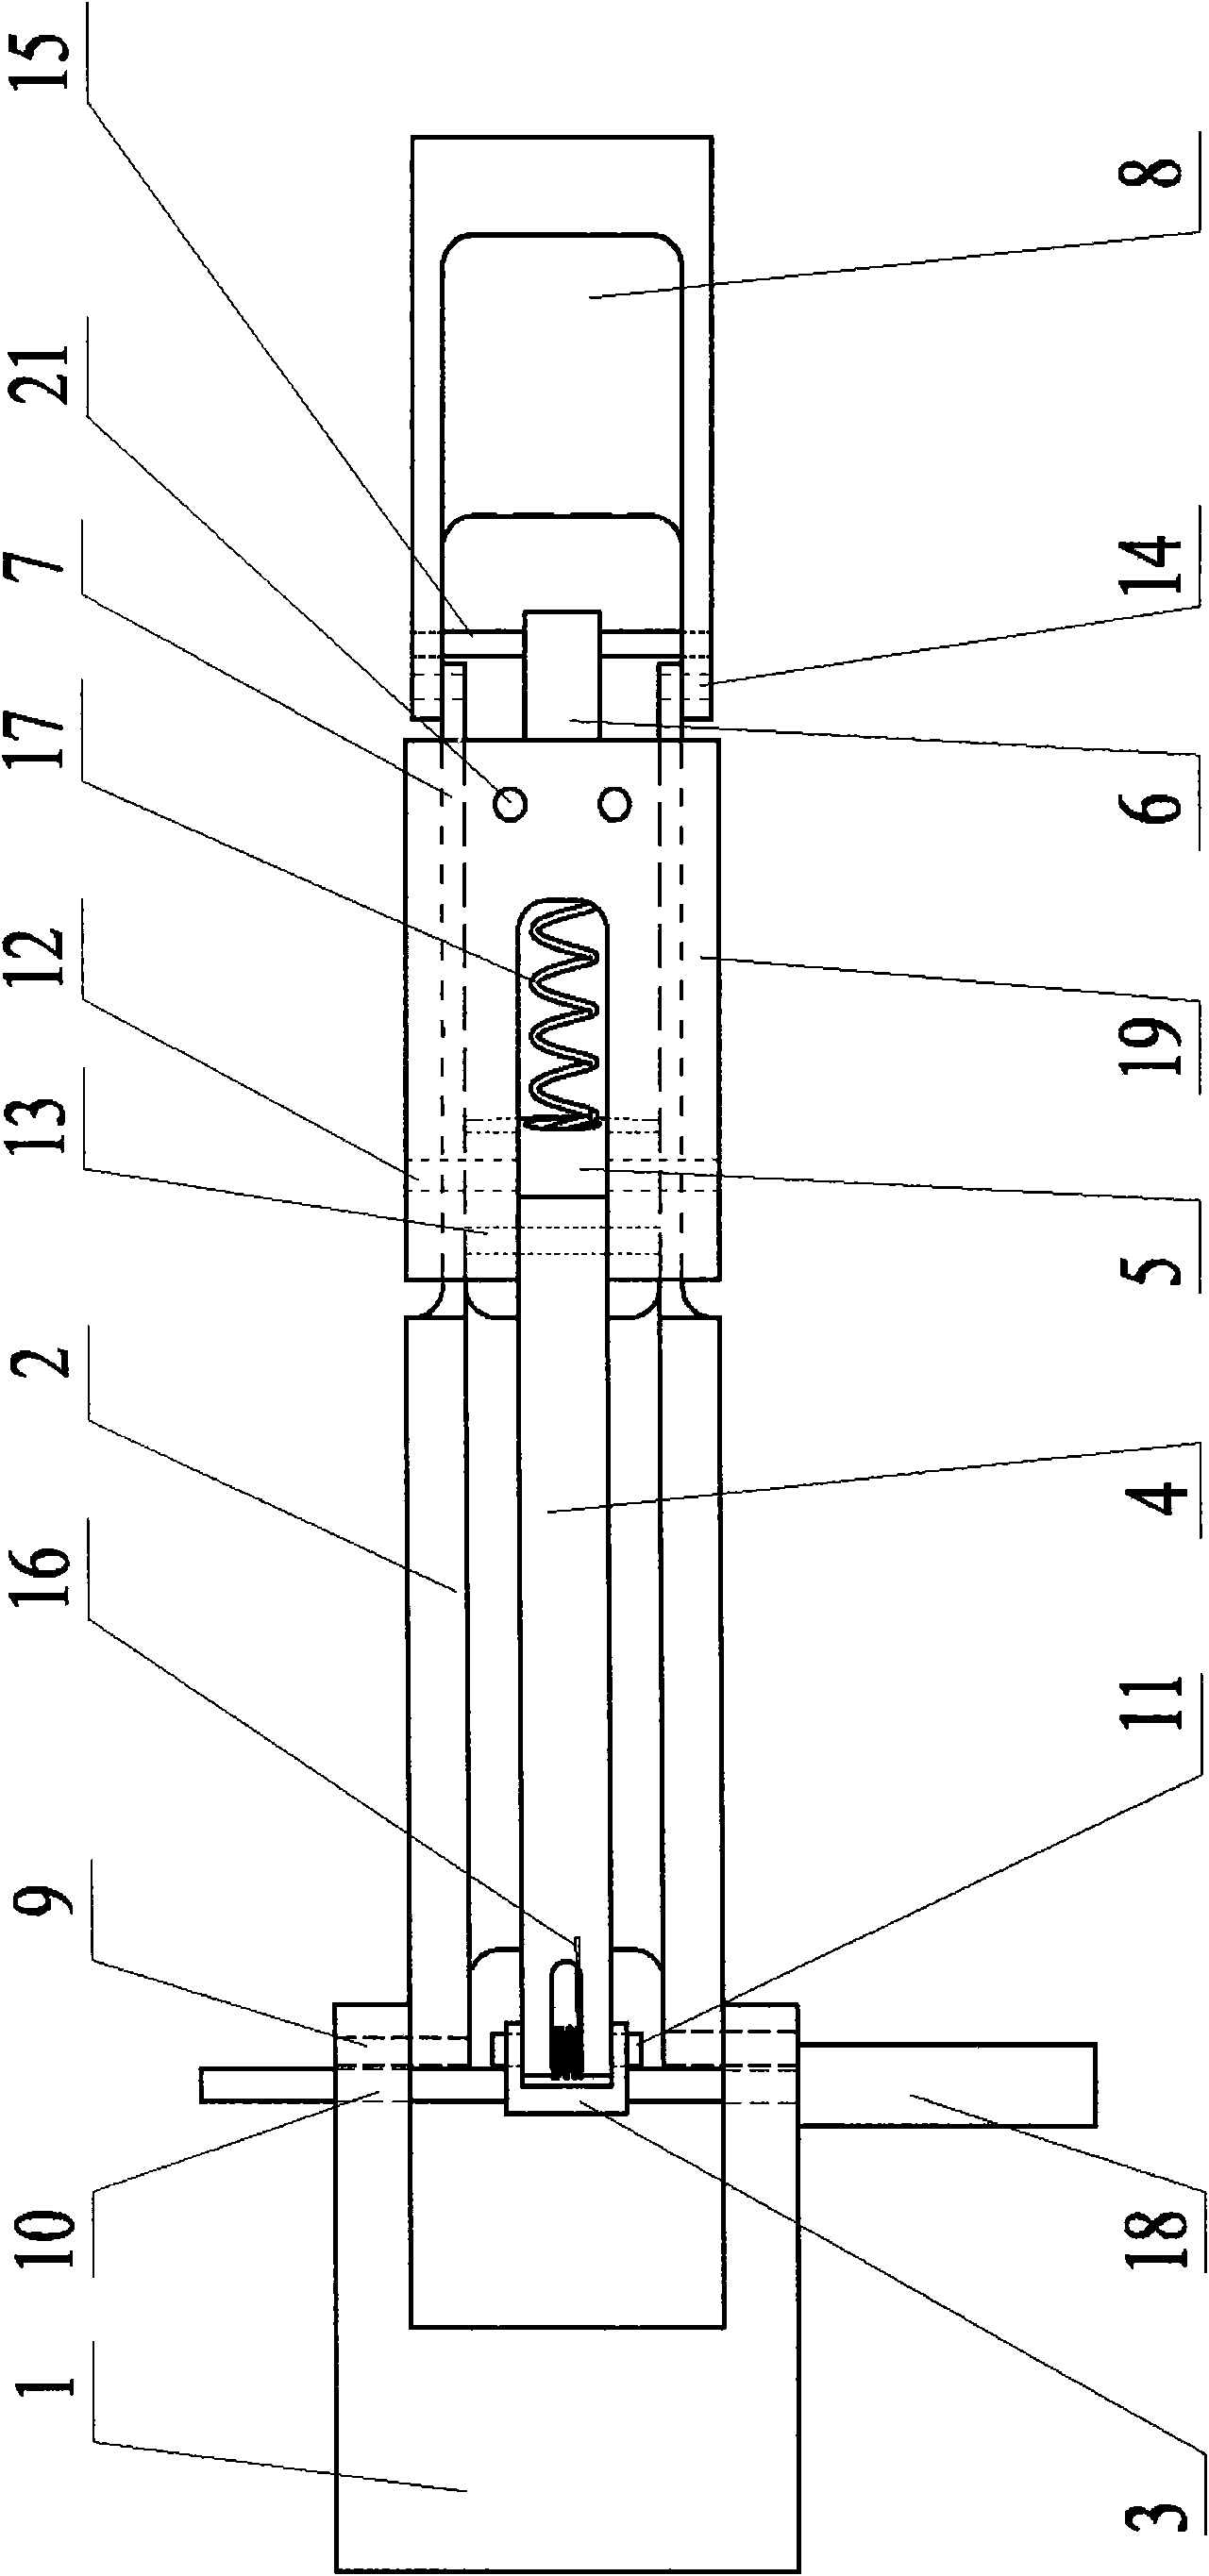 Connecting rod type under-actuated finger mechanism